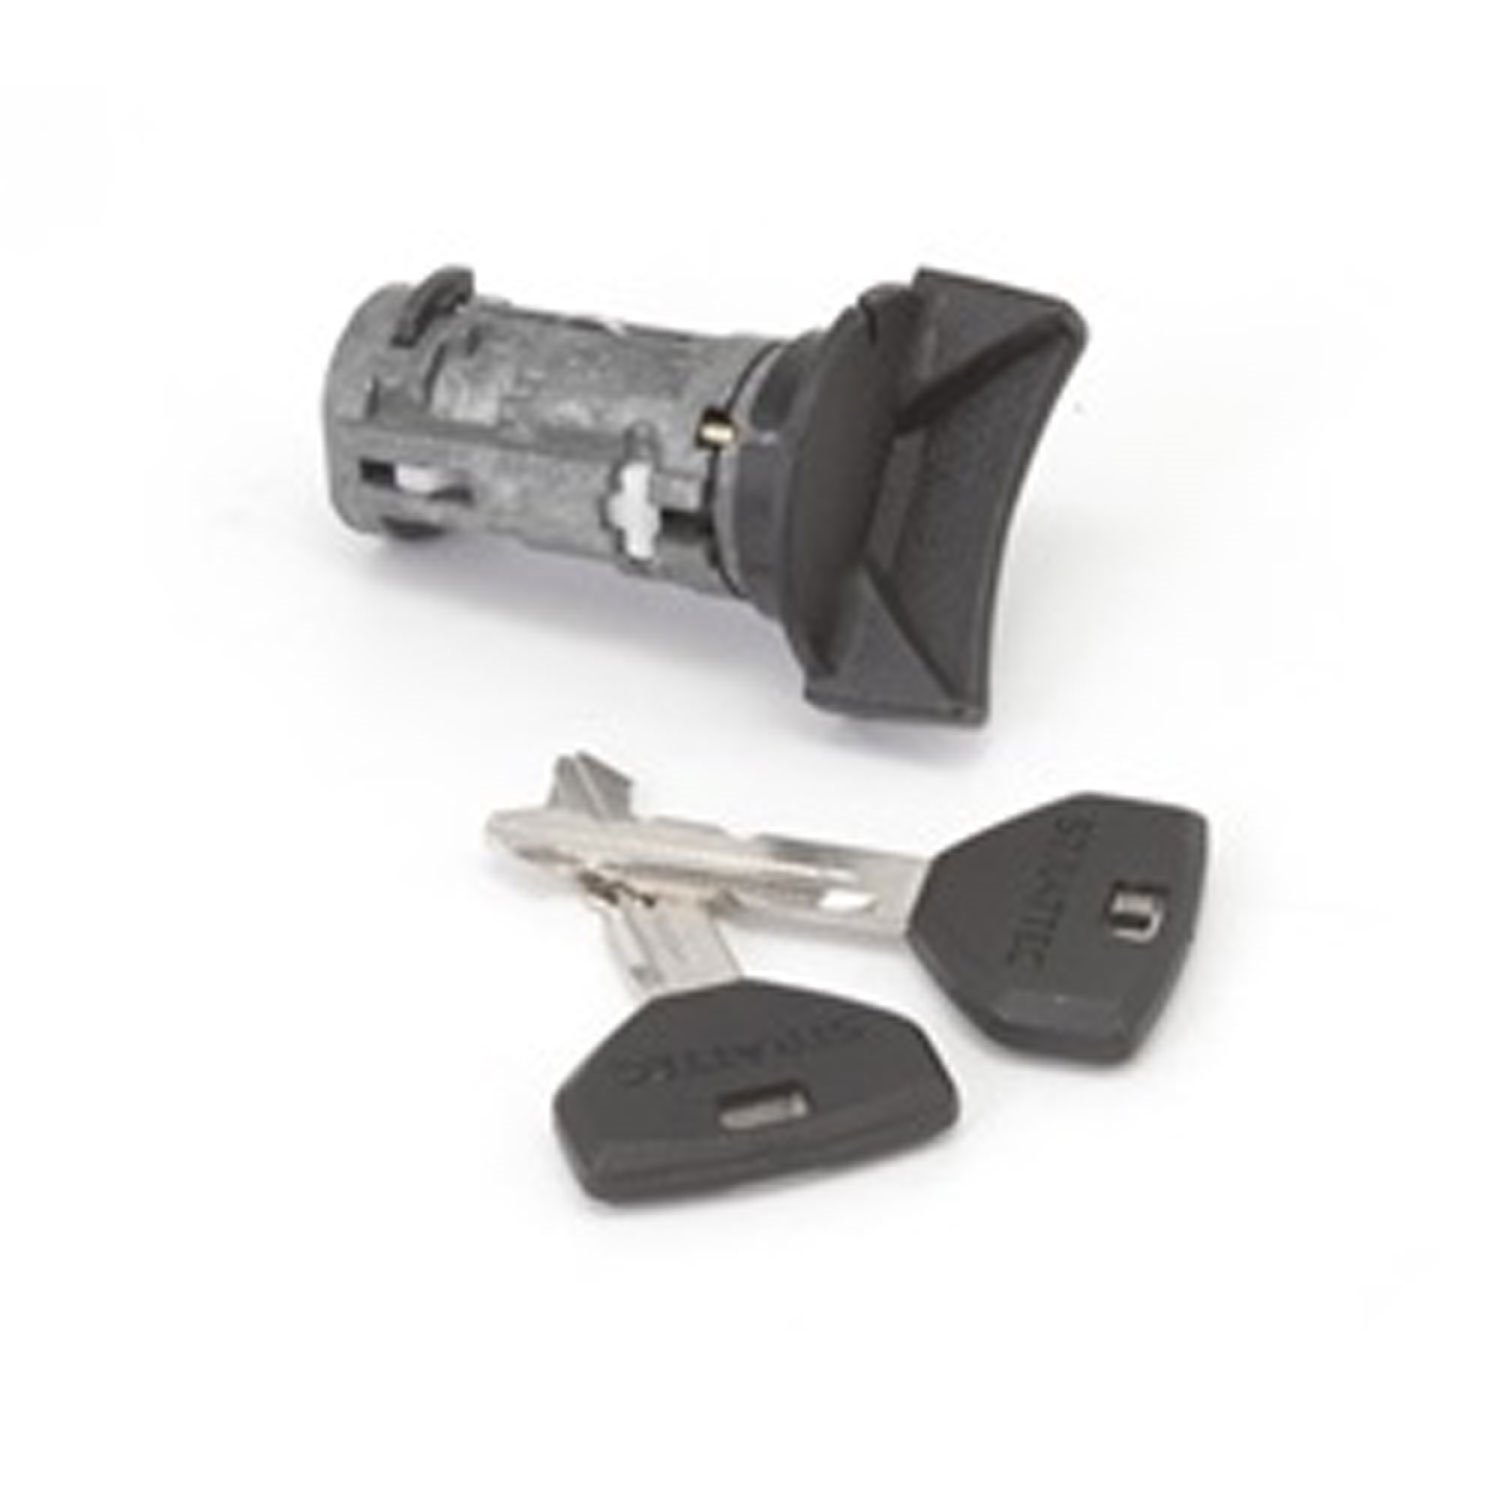 Replacement ignition lock cylinder from Omix-ADA, Fits 90-96